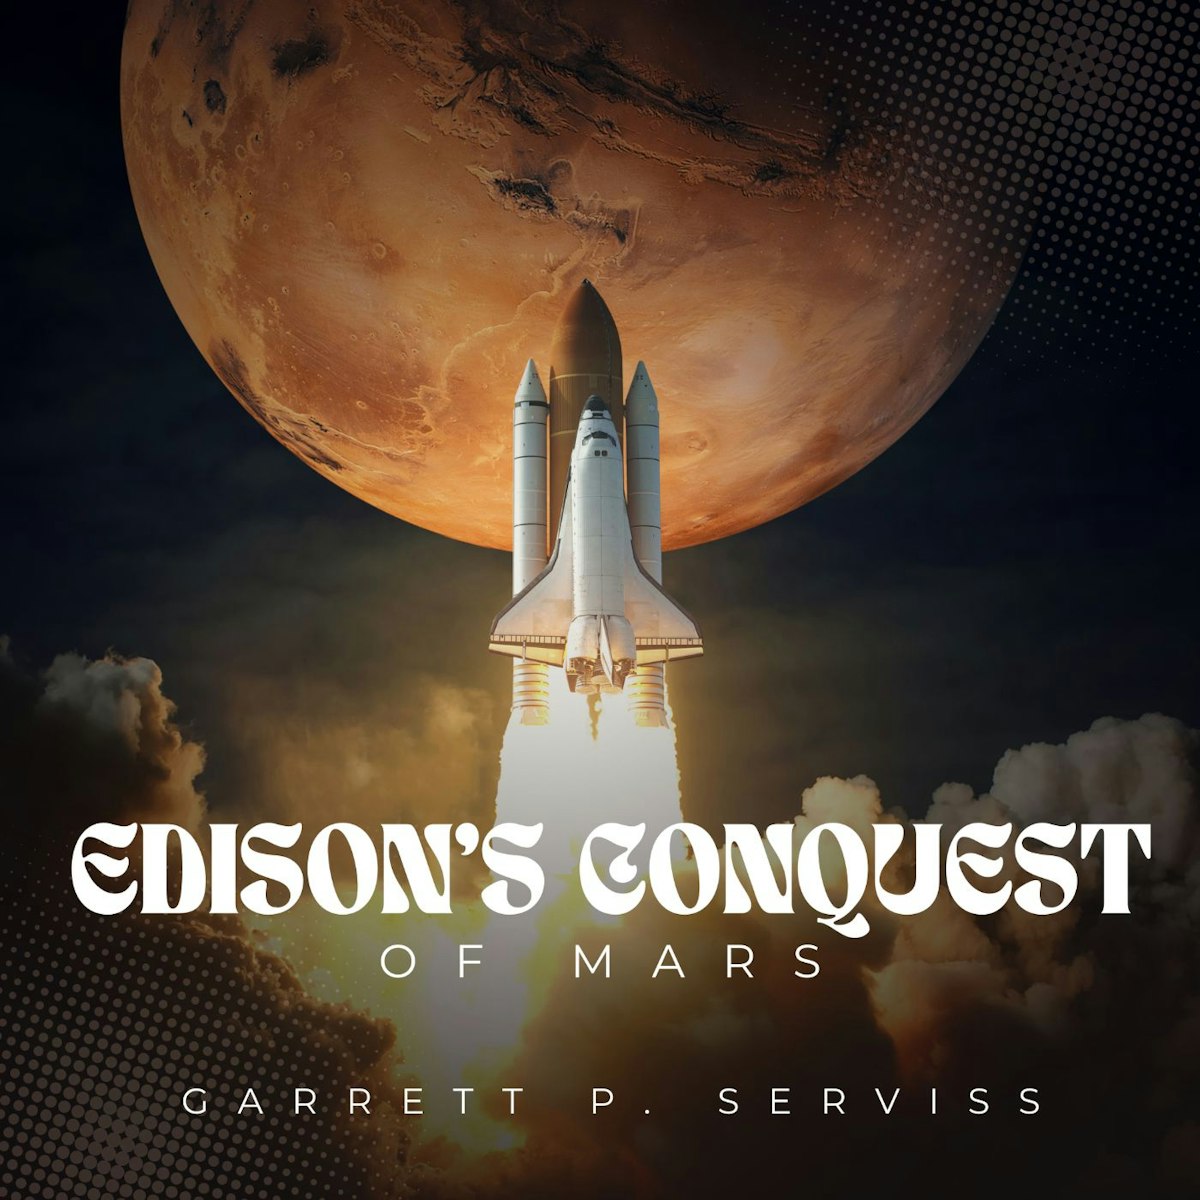 featured image - Edison's Conquest of Mars by Garrett Putman Serviss - Table of Links